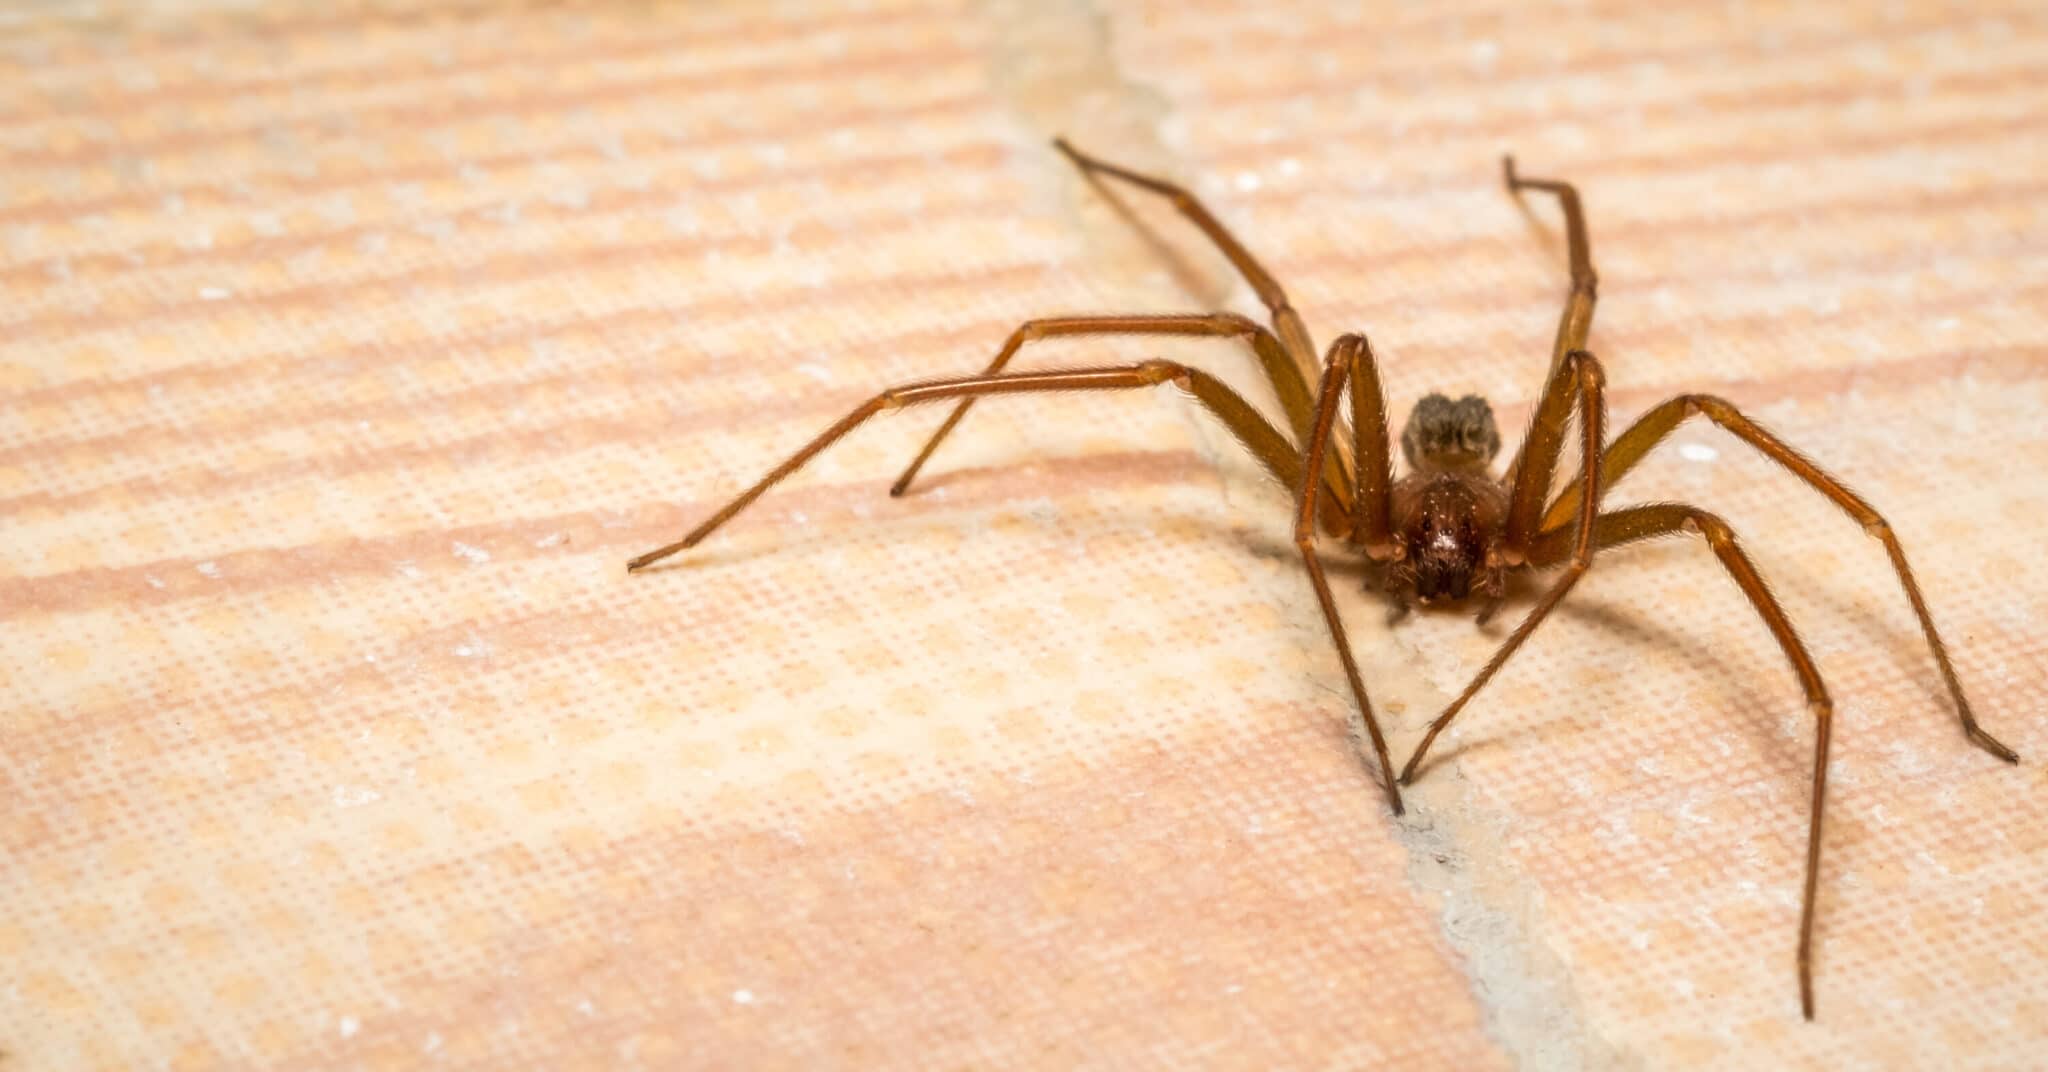 What Should You Do If You Find a Spider in Your House?